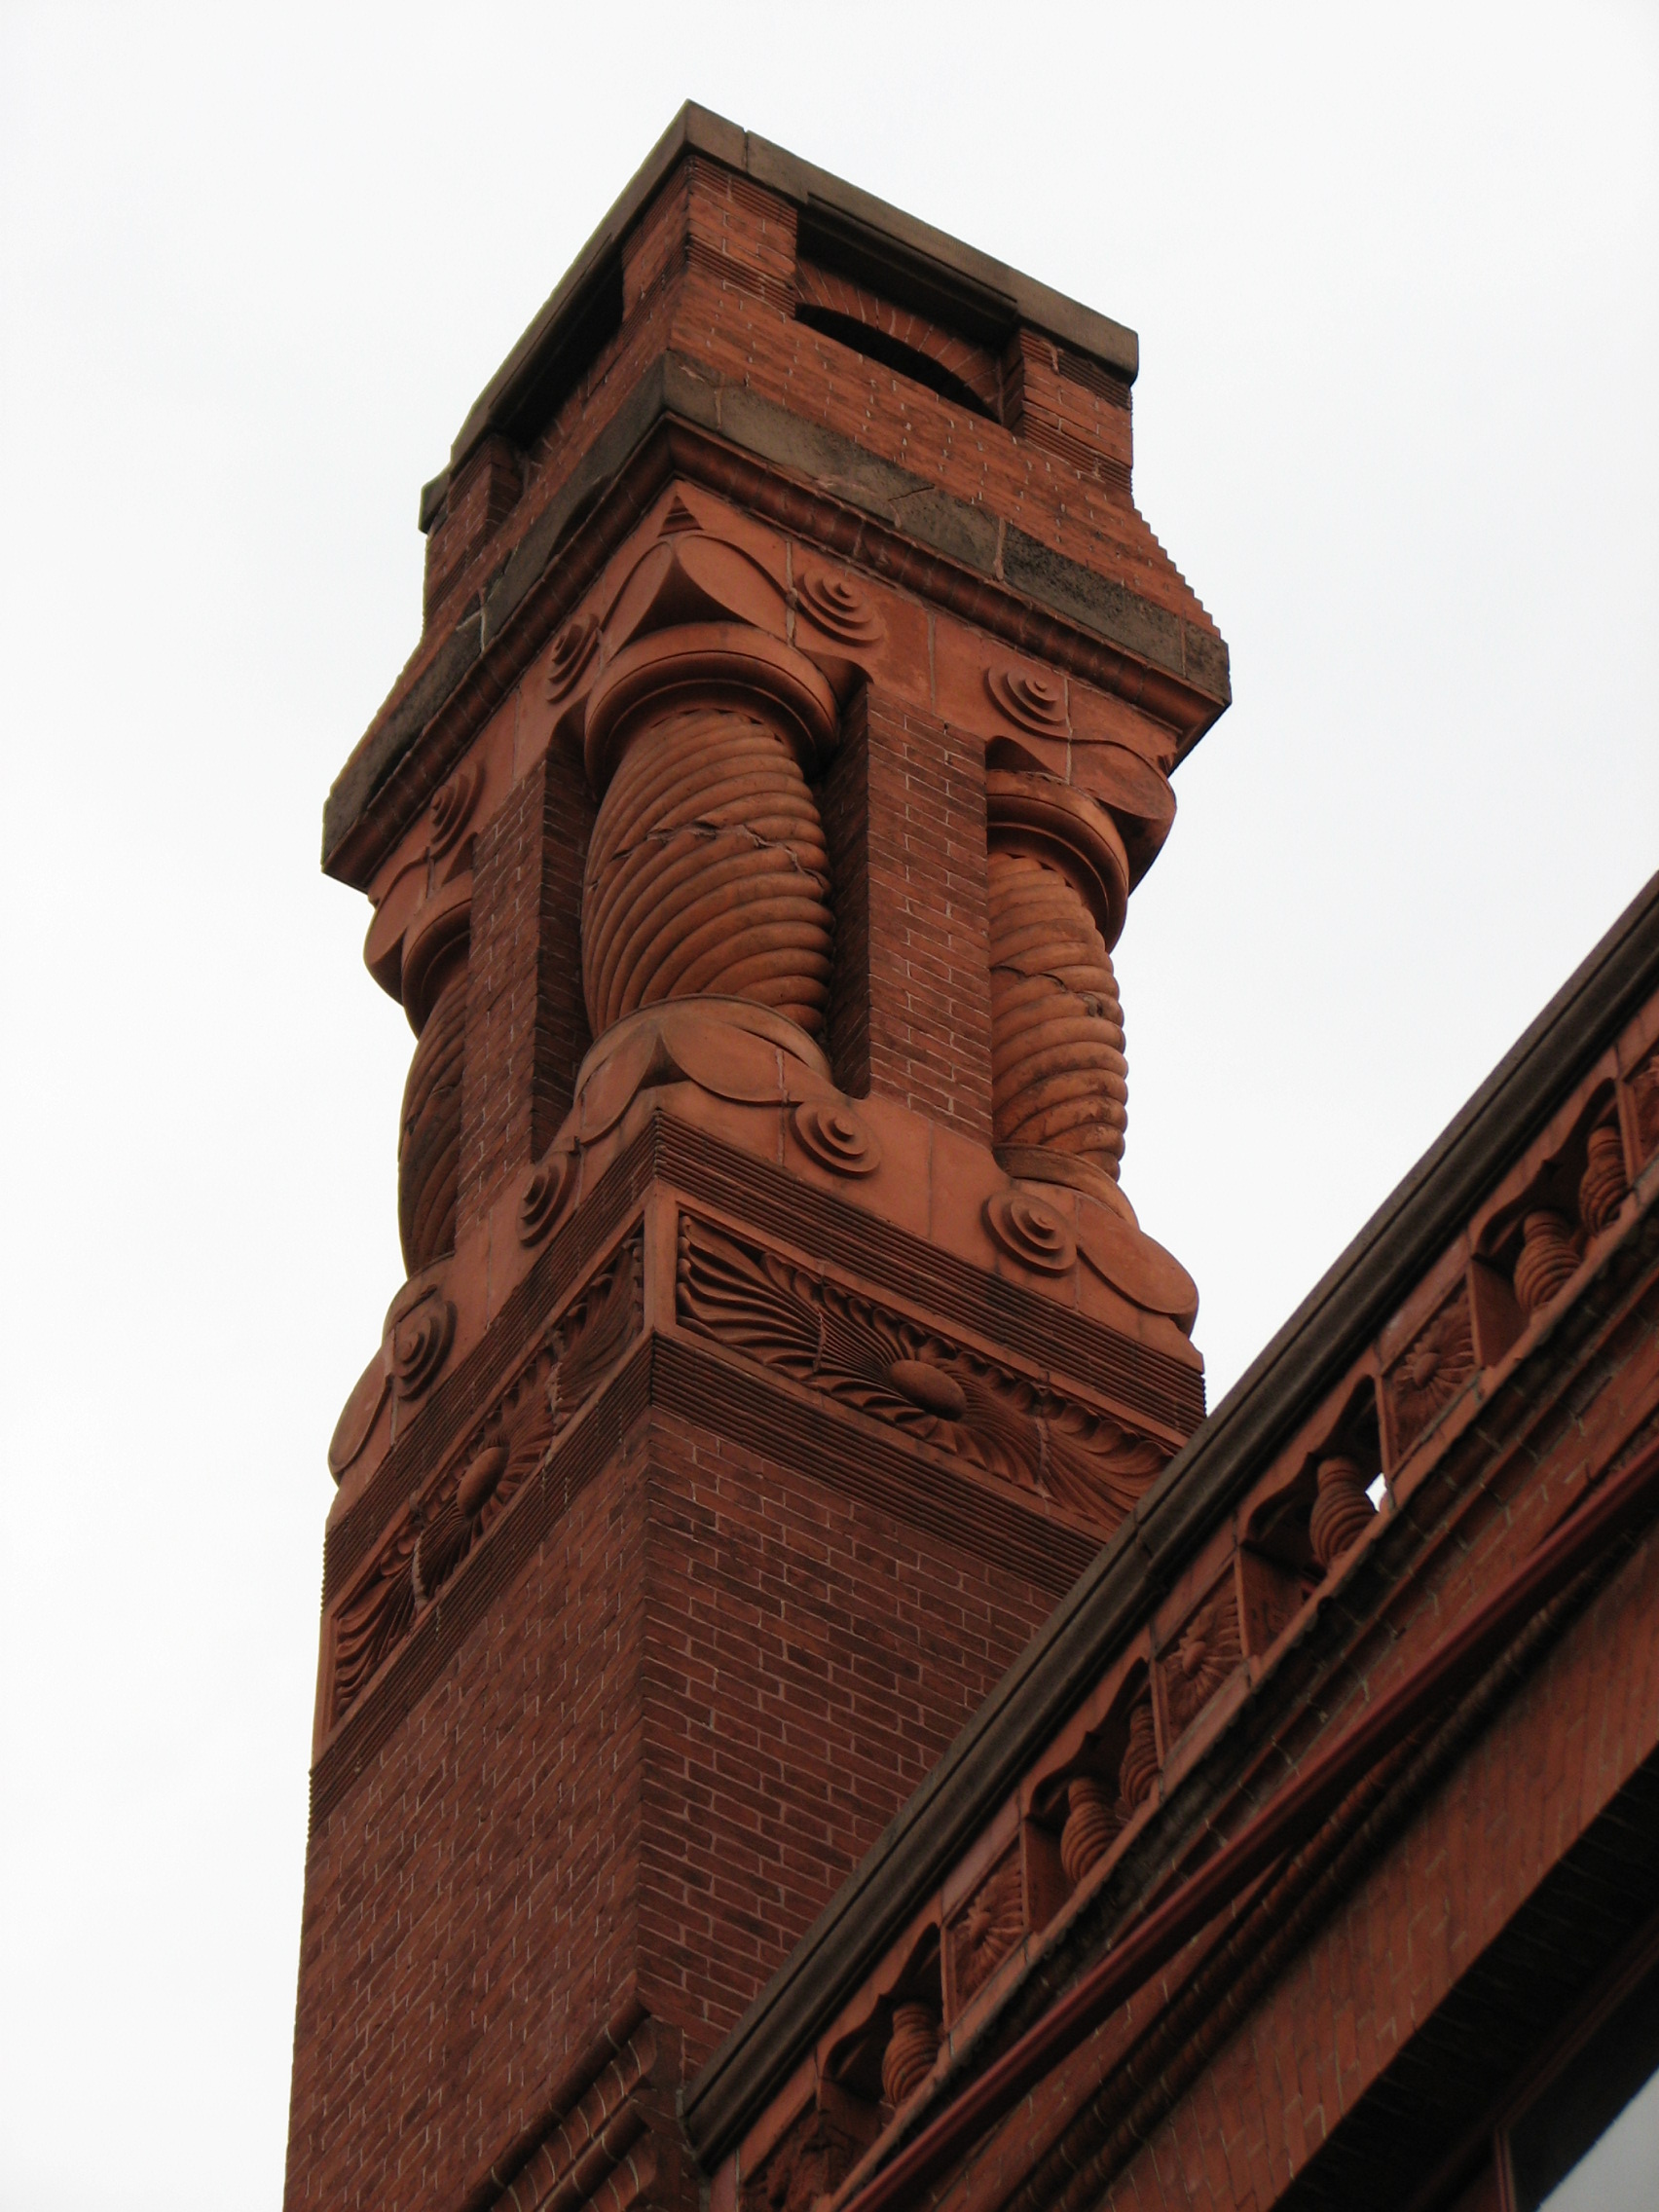 The chimney rises another 12 feet above the roof of the Lippincott House.